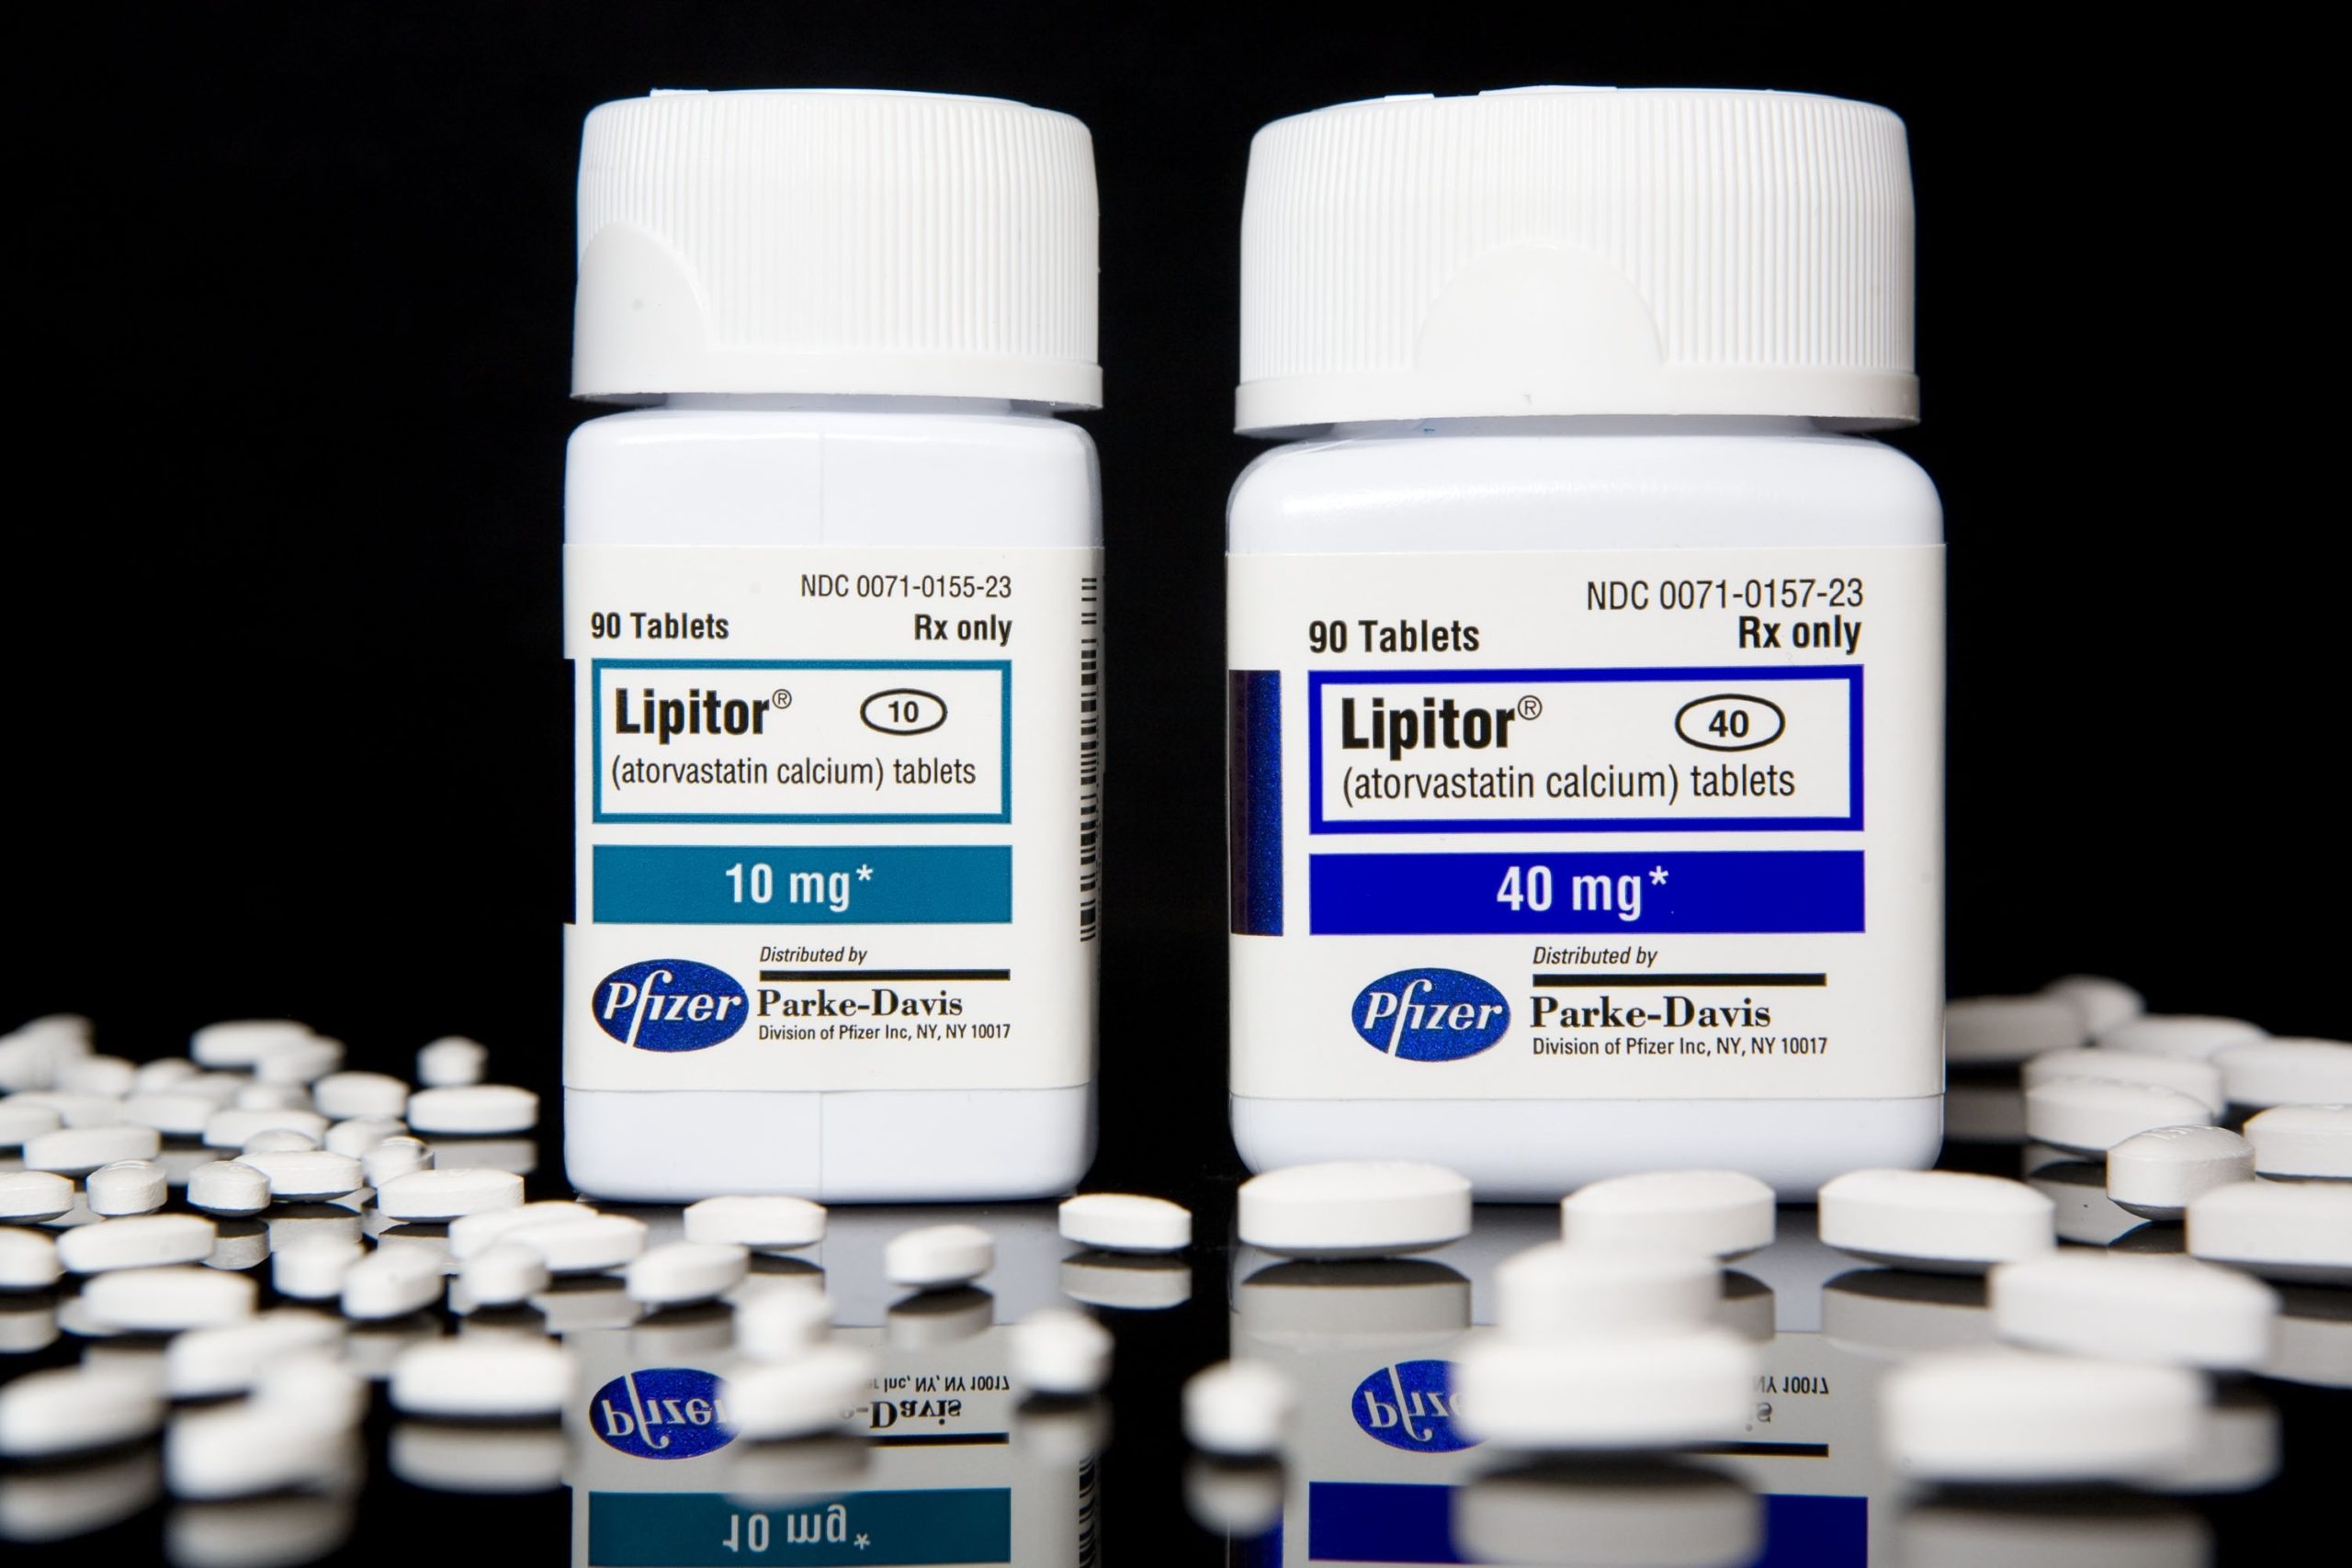 How to Spot Fake Lipitor